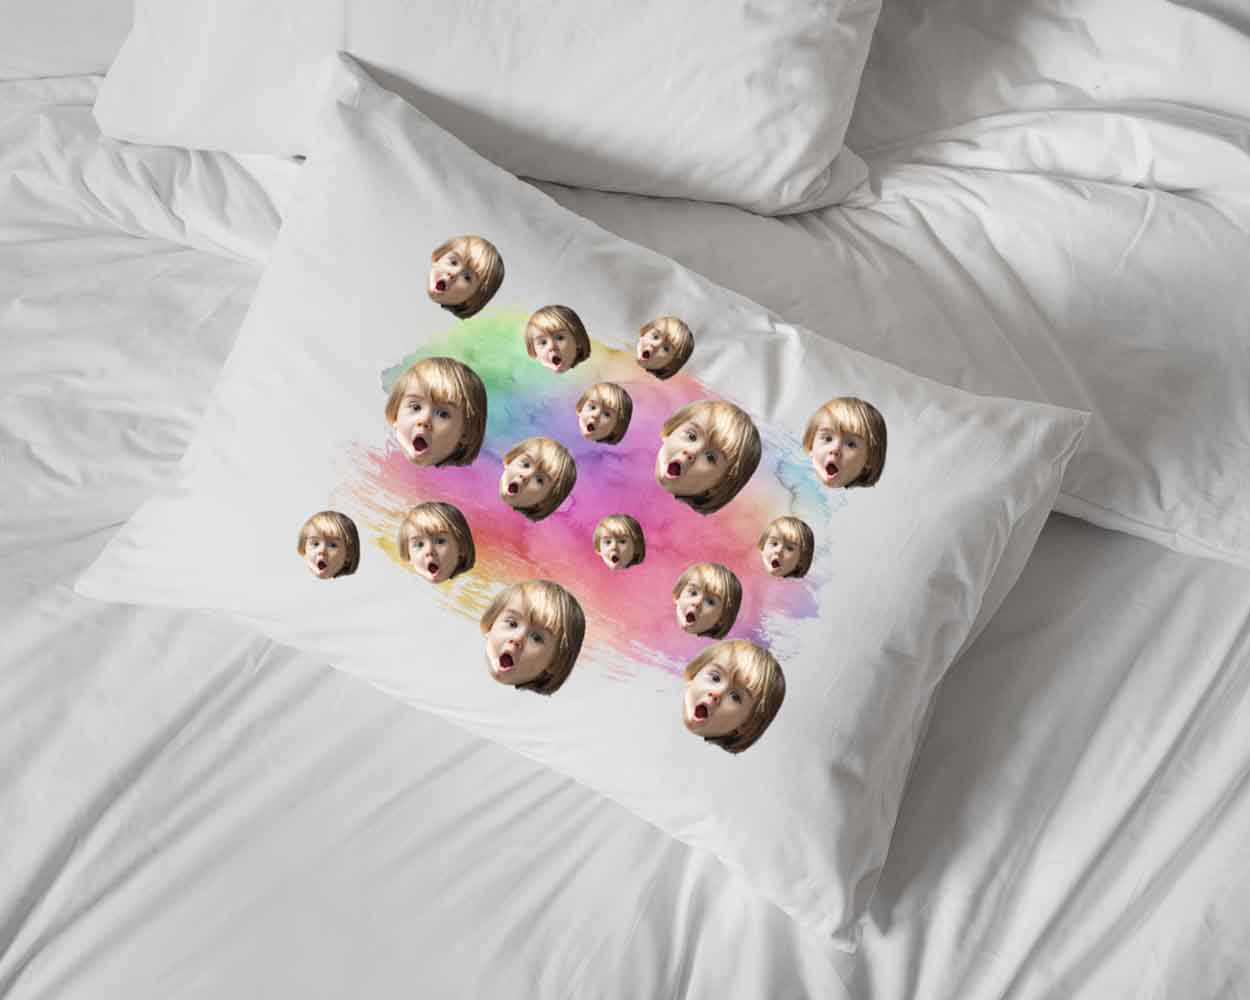 Rainbow wash design and all over cropped photo faces digitally printed in ink on white cotton standard pillowcase makes the perfect sleepover pillow.